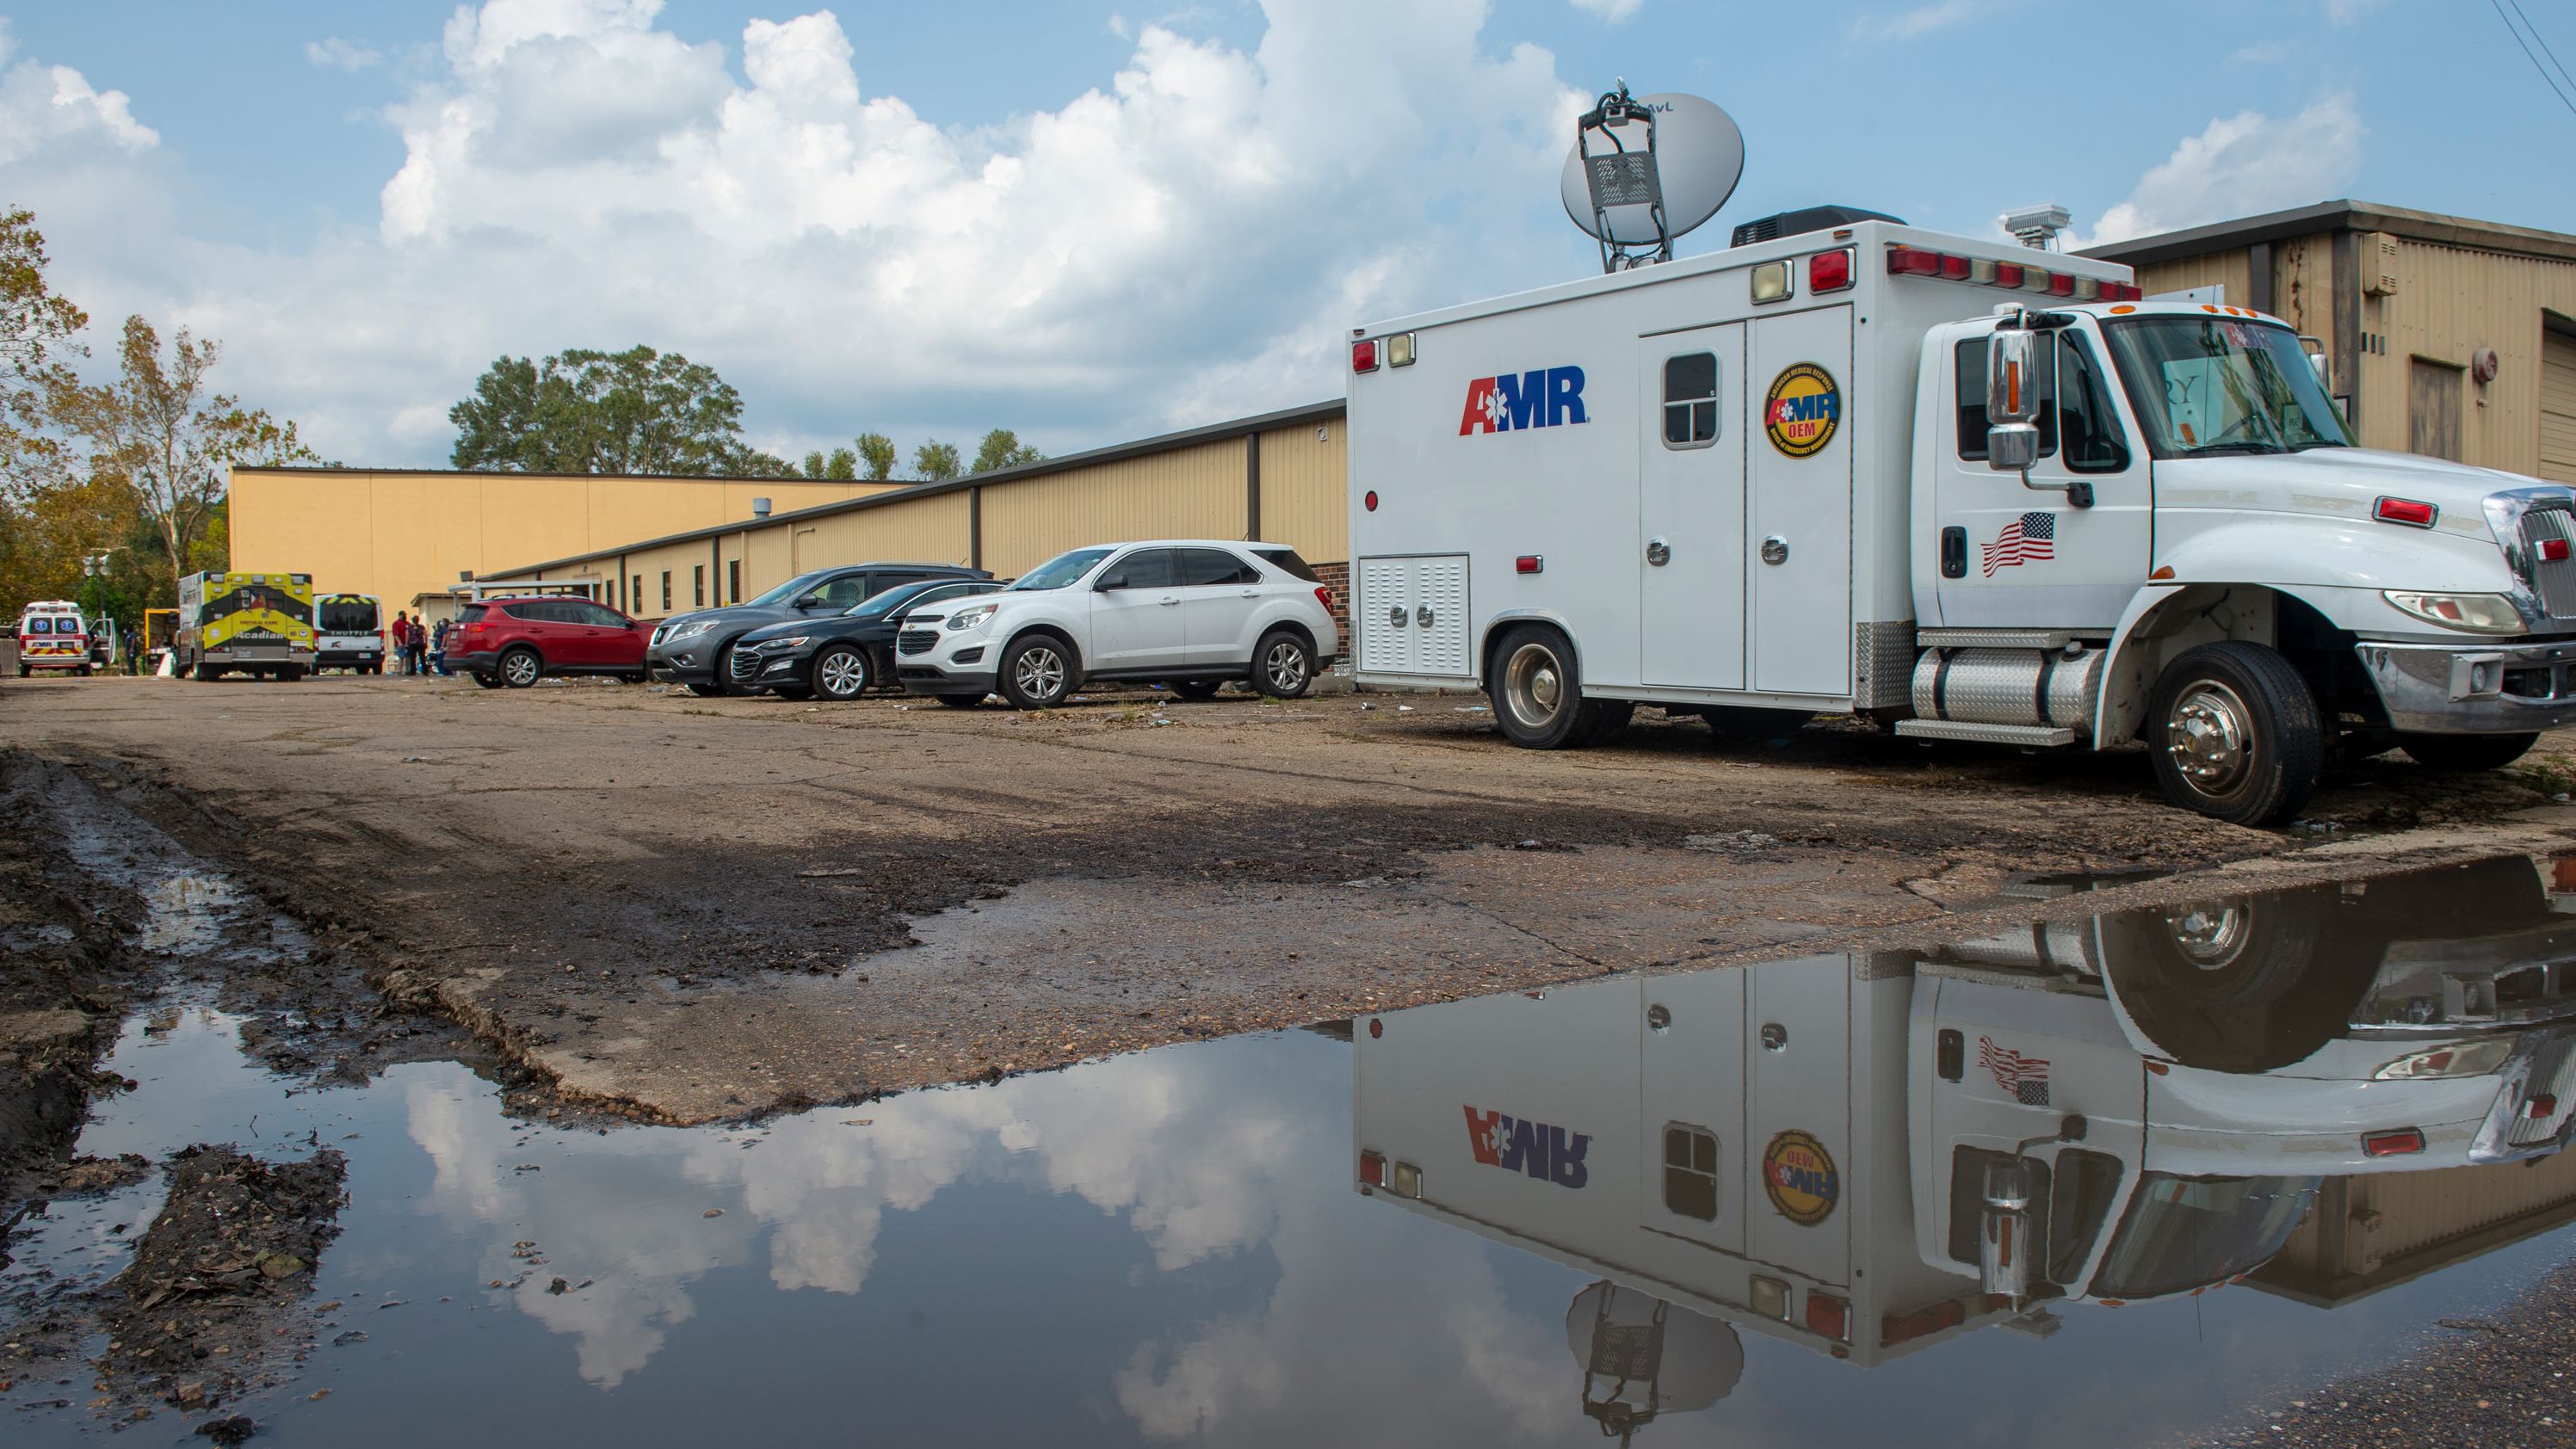 Emergency vehicles respond to evacuate people at a mass shelter on Thursday, Sept. 2, 2021, in Independence, Louisiana.